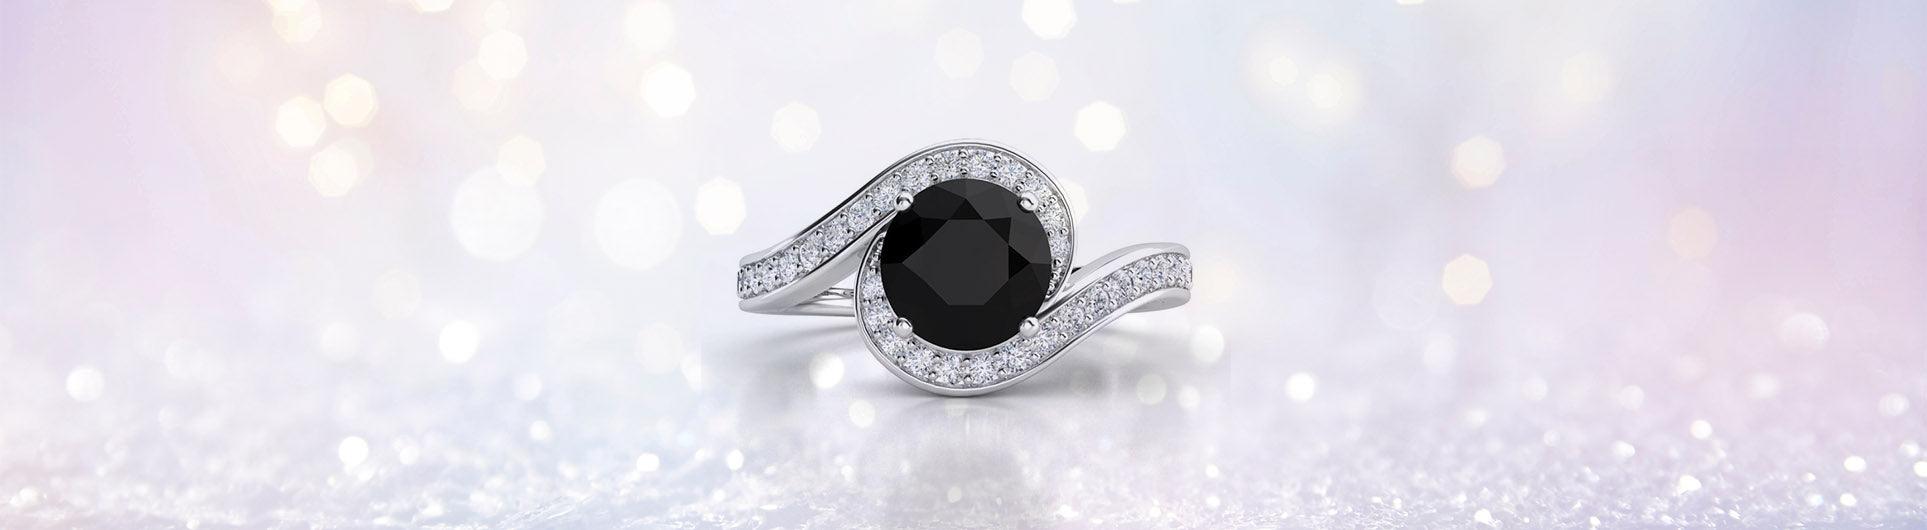 The Black Diamond - Dramatic, Alluring, and at Monroe Yorke Diamonds - Monroe Yorke Diamonds